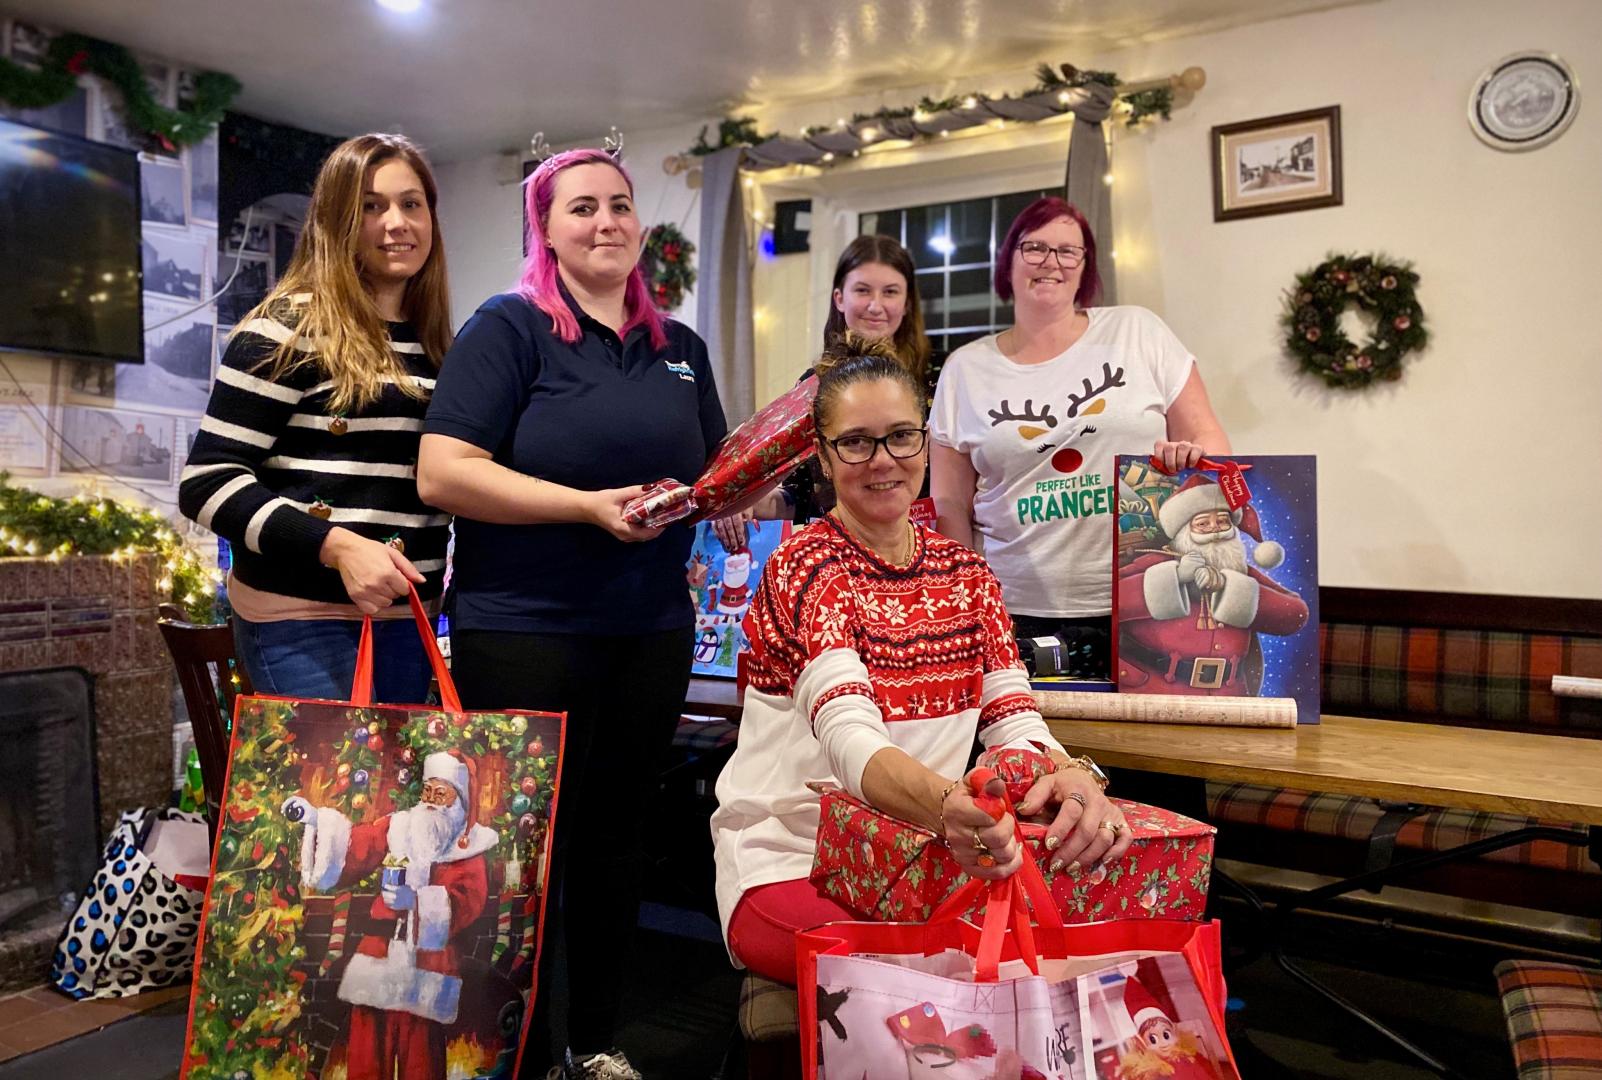 Volunteers at The Lamb Inn, Worle. Pictured from left to right: Keeley Vowels; Laura Hughes; Charley Hughes; Joanne Hughes (standing); and Mandi Dexter (seated) holding Christmas presents for people who are homeless or threatened with homelessness